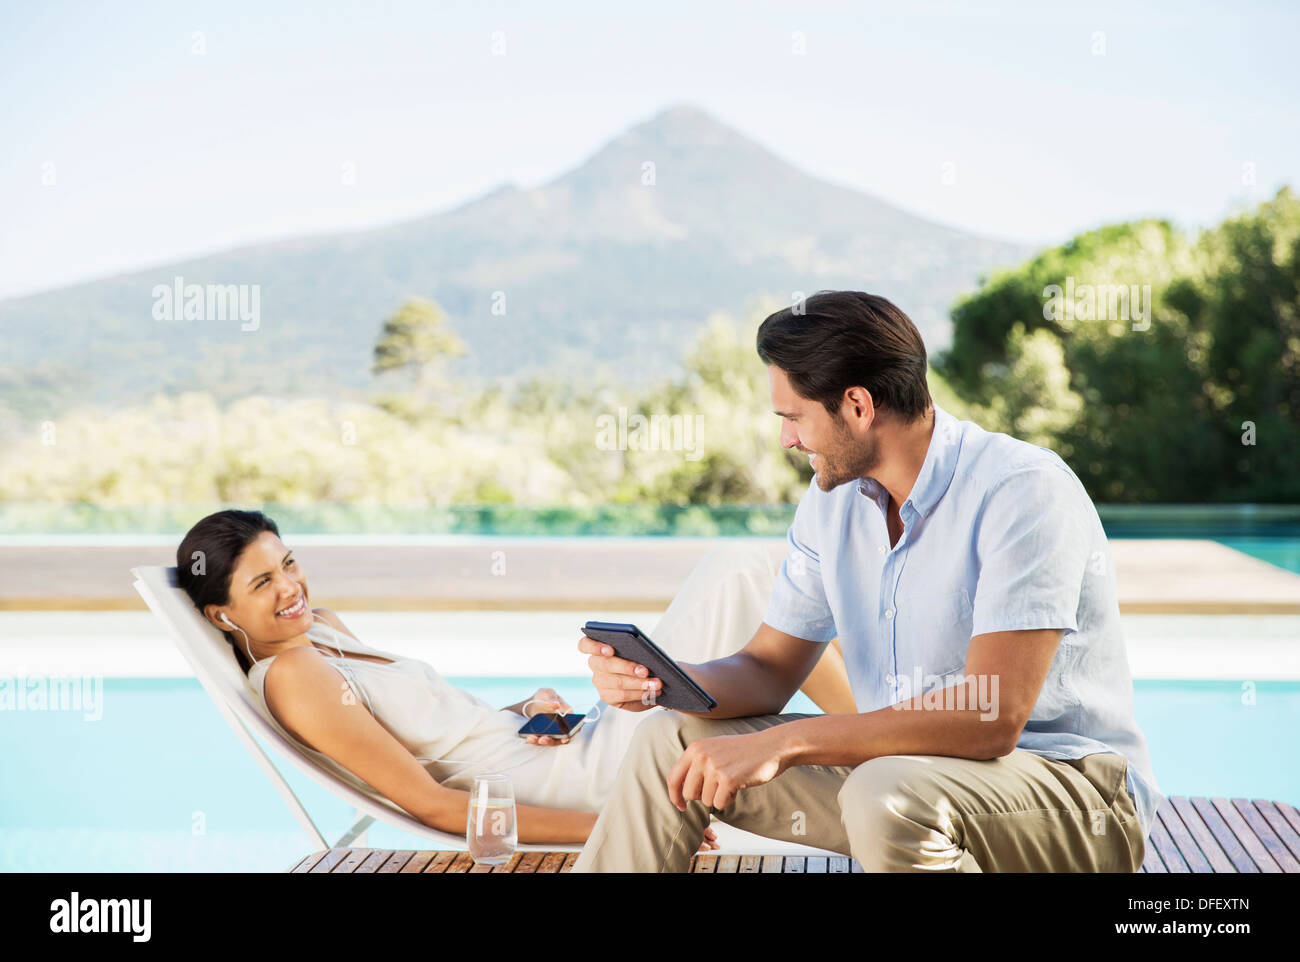 Couple relaxing poolside Stock Photo